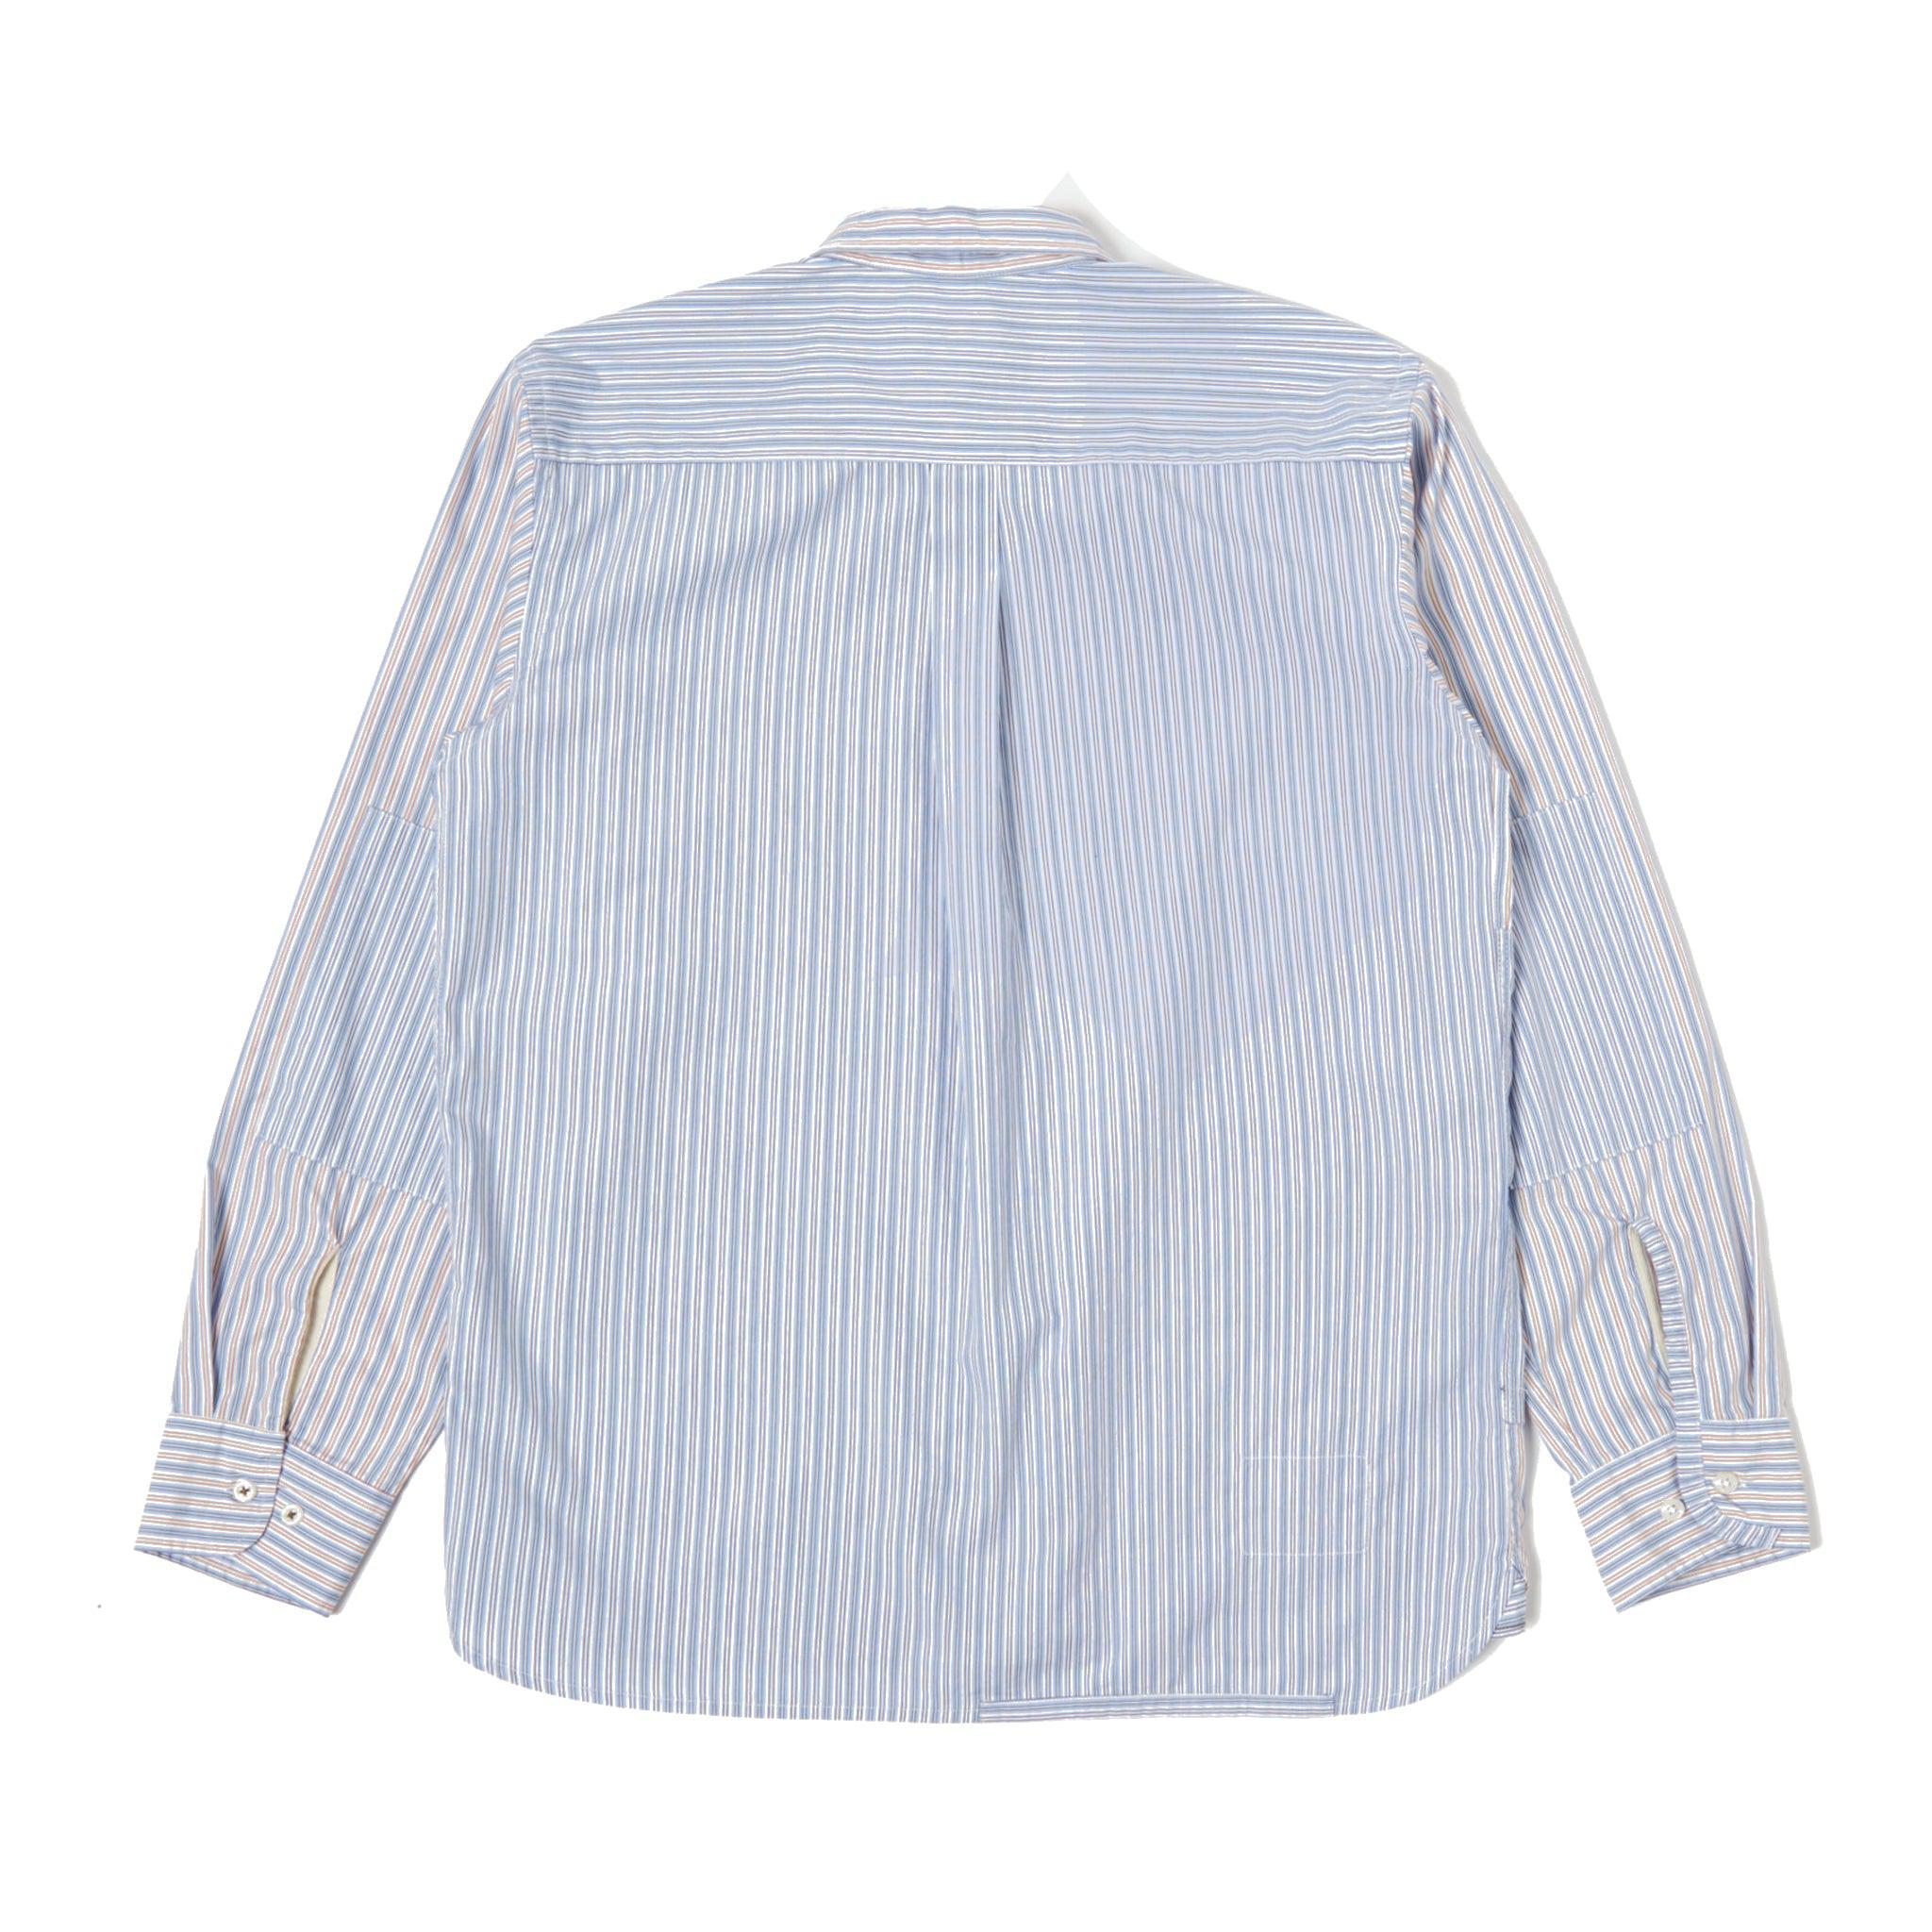 Patched Shirt Busy Stripe Cotton - Blue Stripe-Universal Works-W2 Store